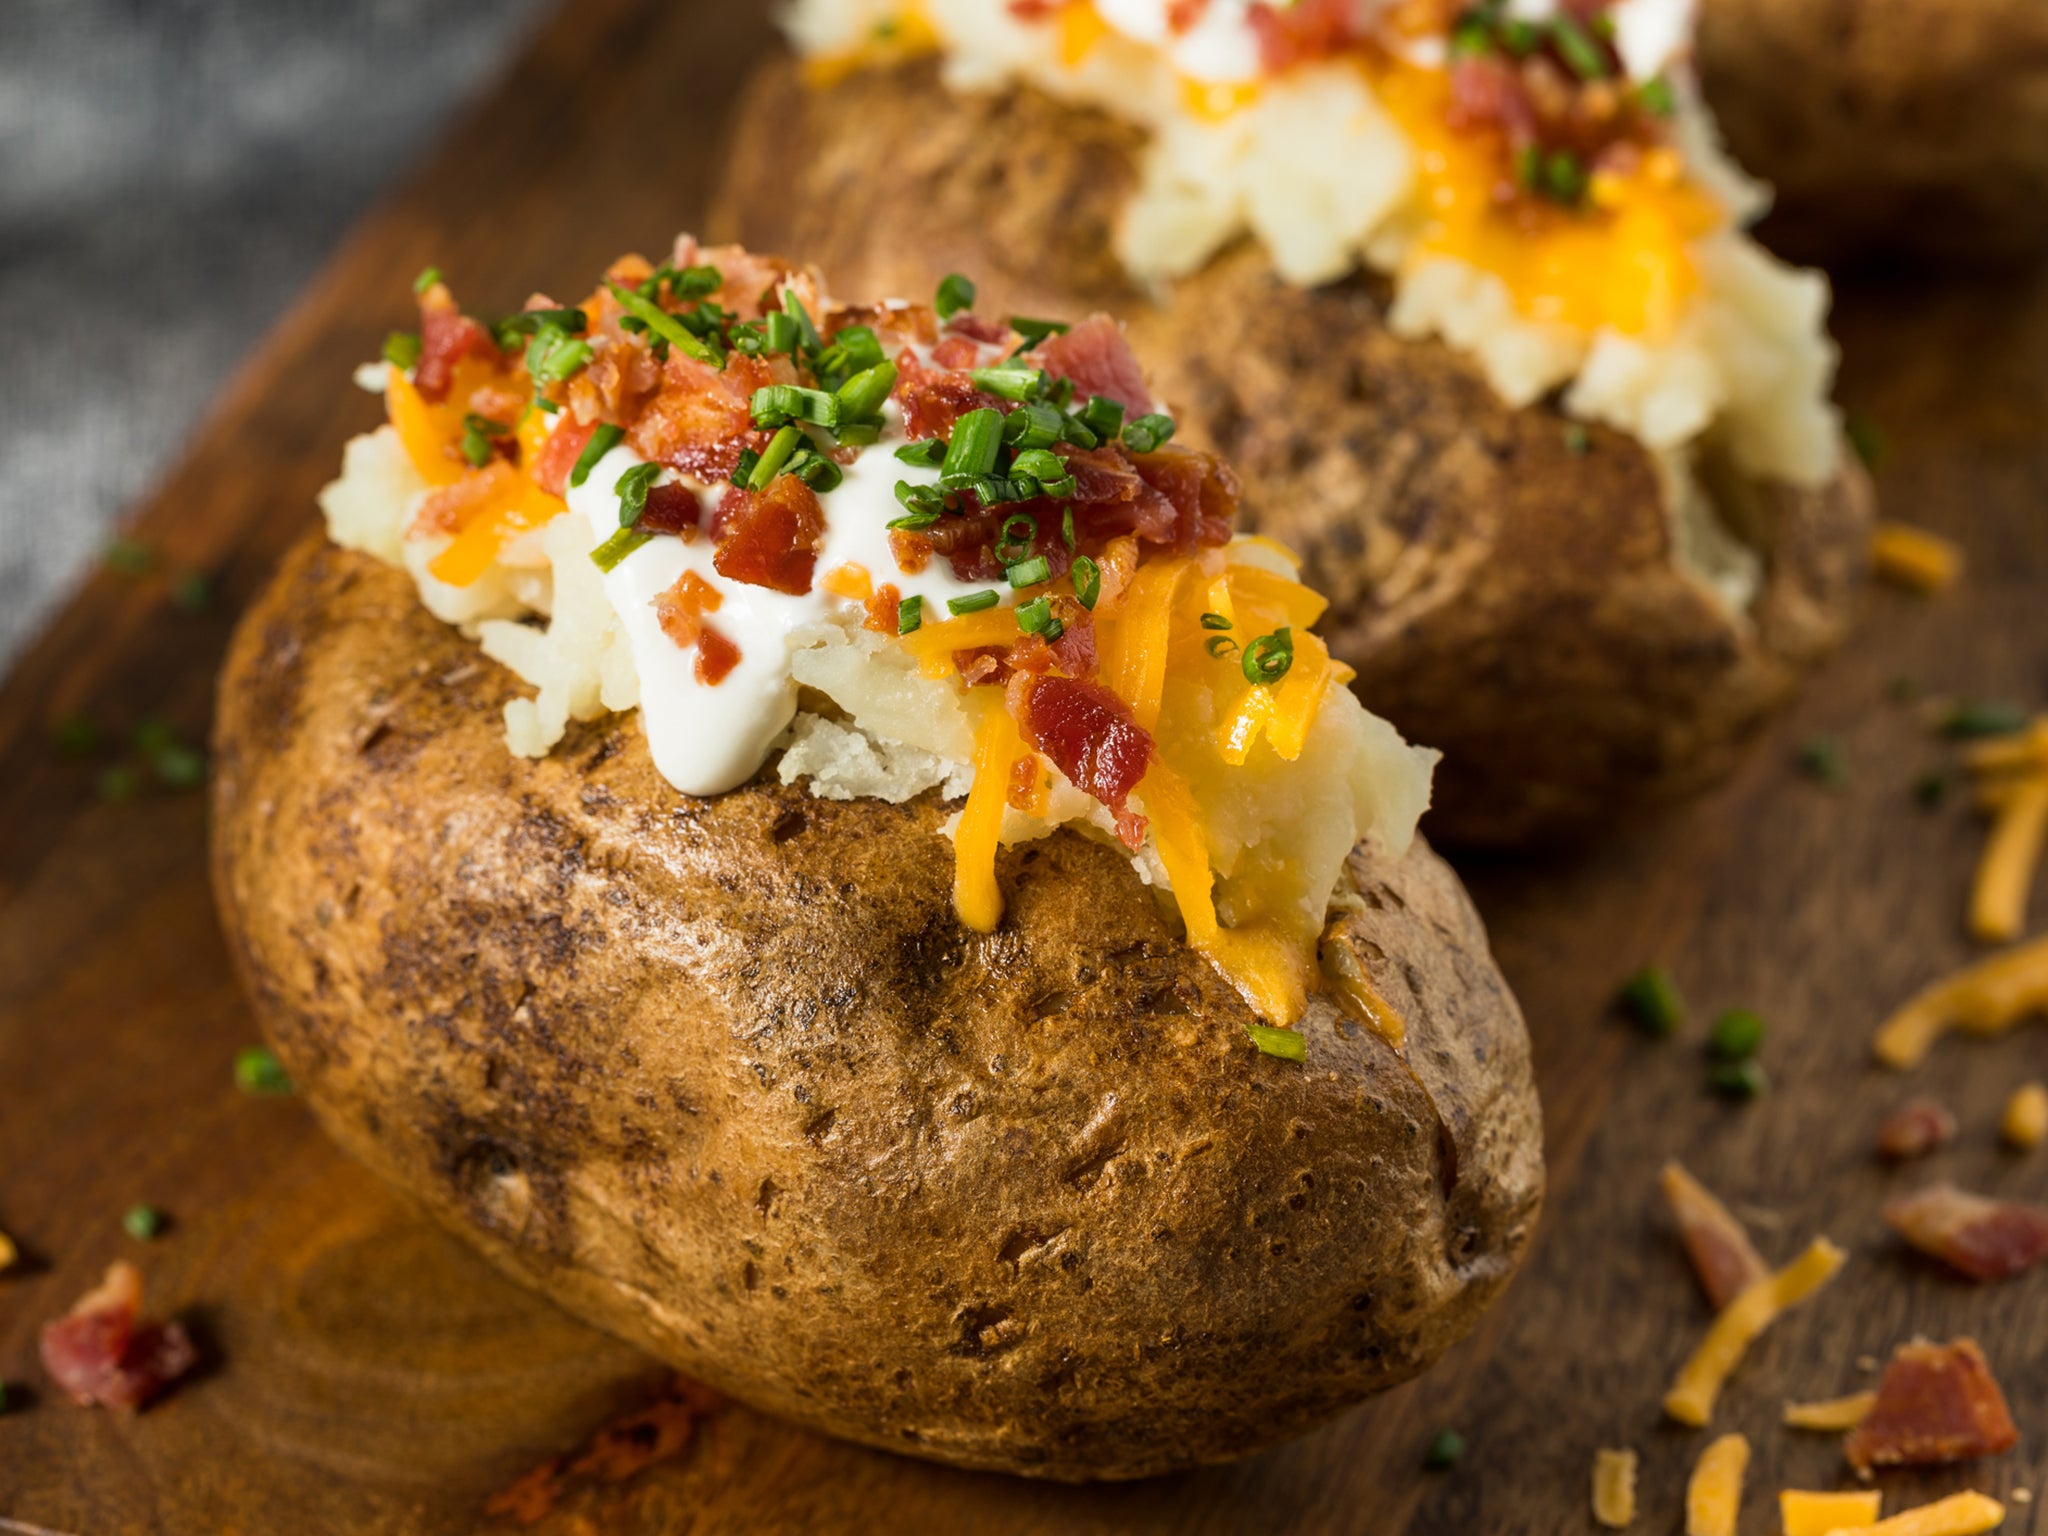 Loaded Potato Skins Stuffed with Cheese and Bacon, Crispy in the Air Fryer